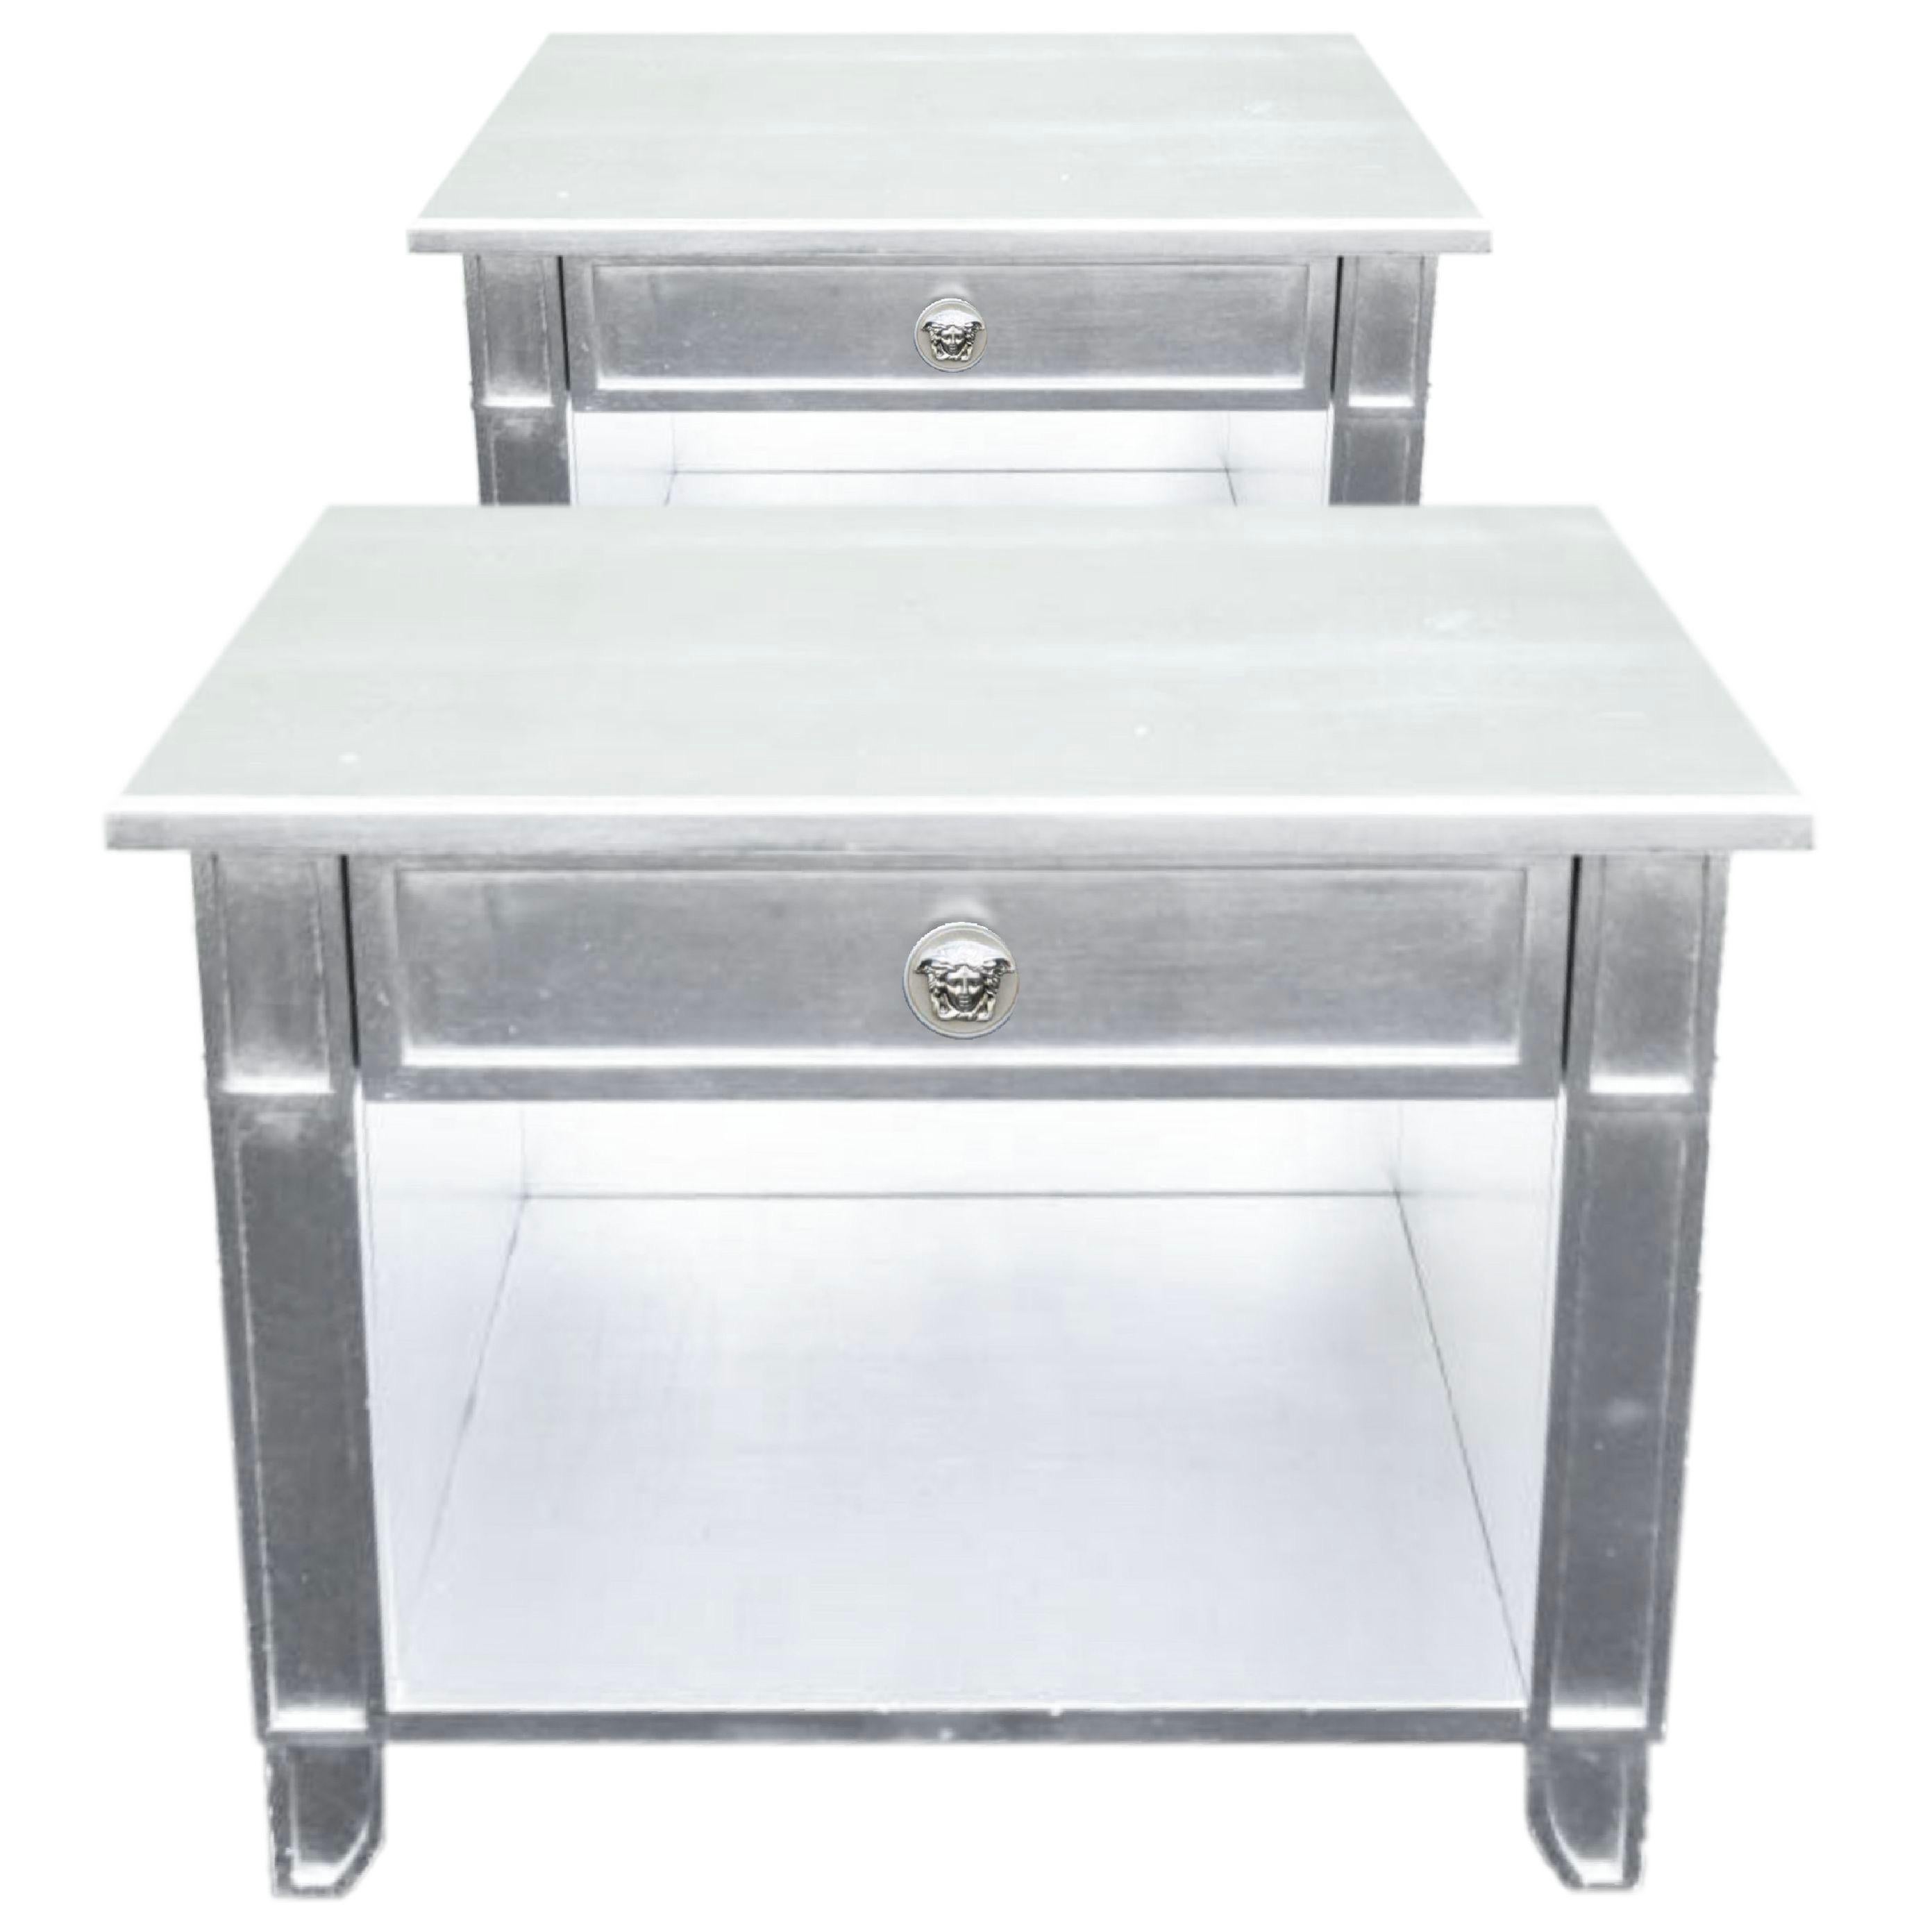 Italian Versace Silvered End Table Pair with Drawer, Medusa Handle, Gianni Versace, 1995